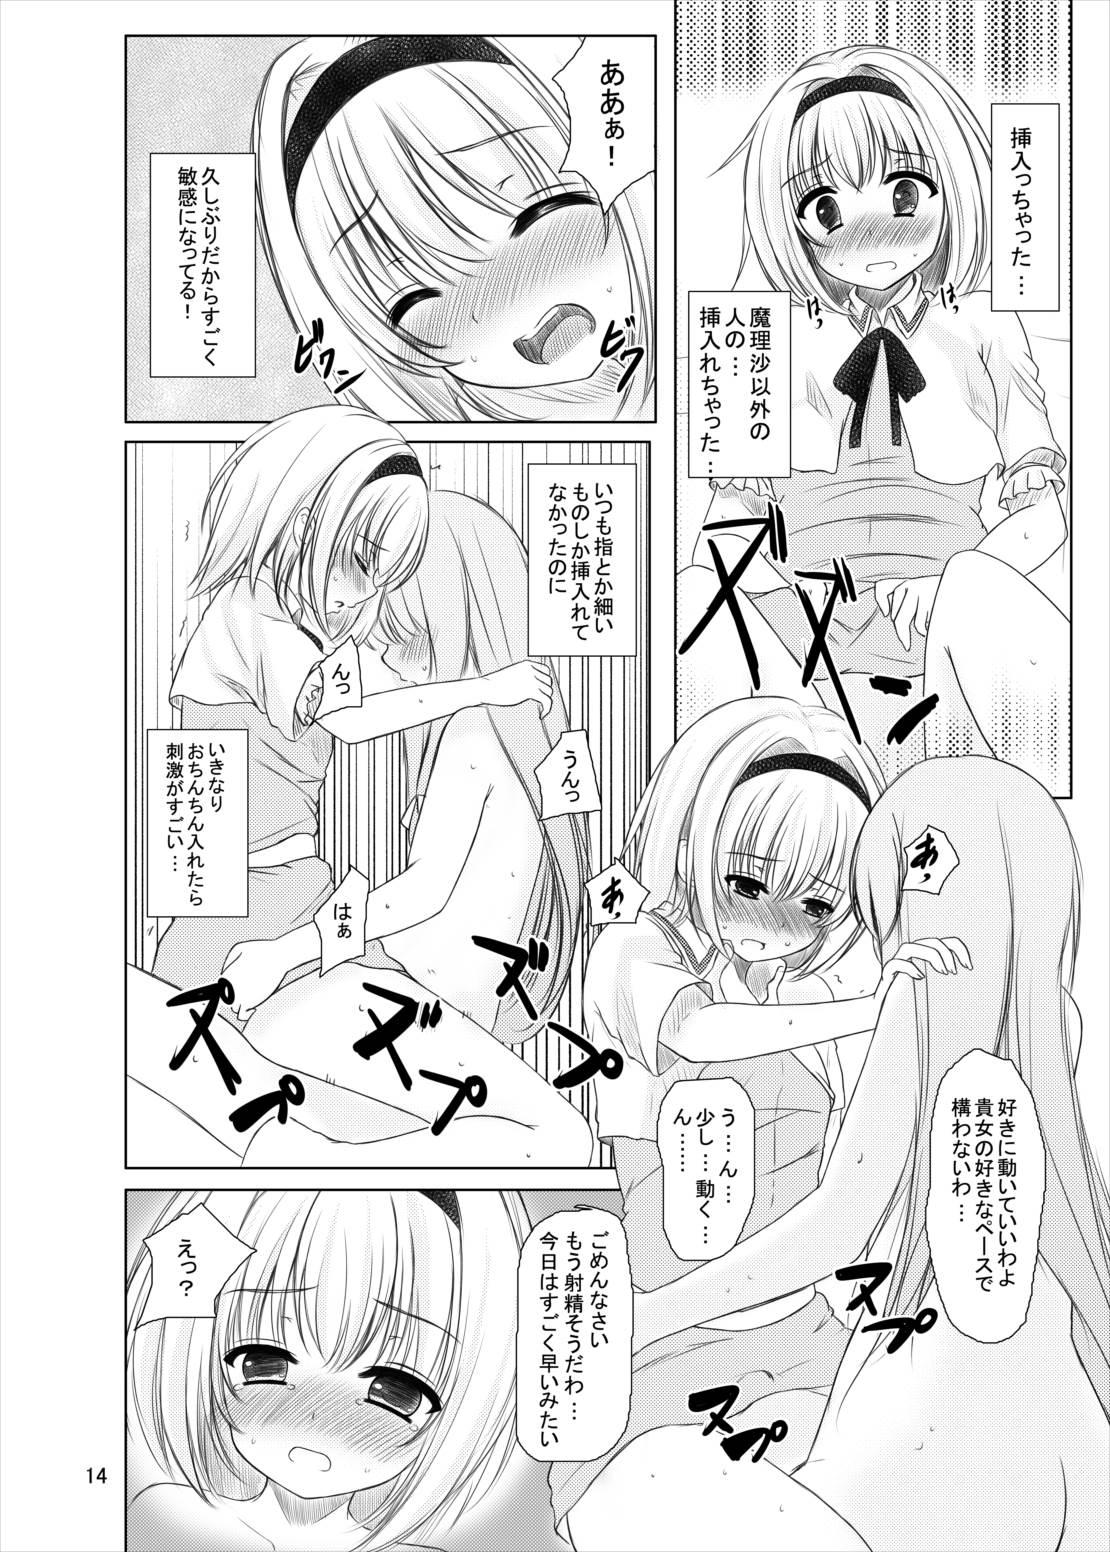 Students Manupilate puppet - Touhou project Asstomouth - Page 13